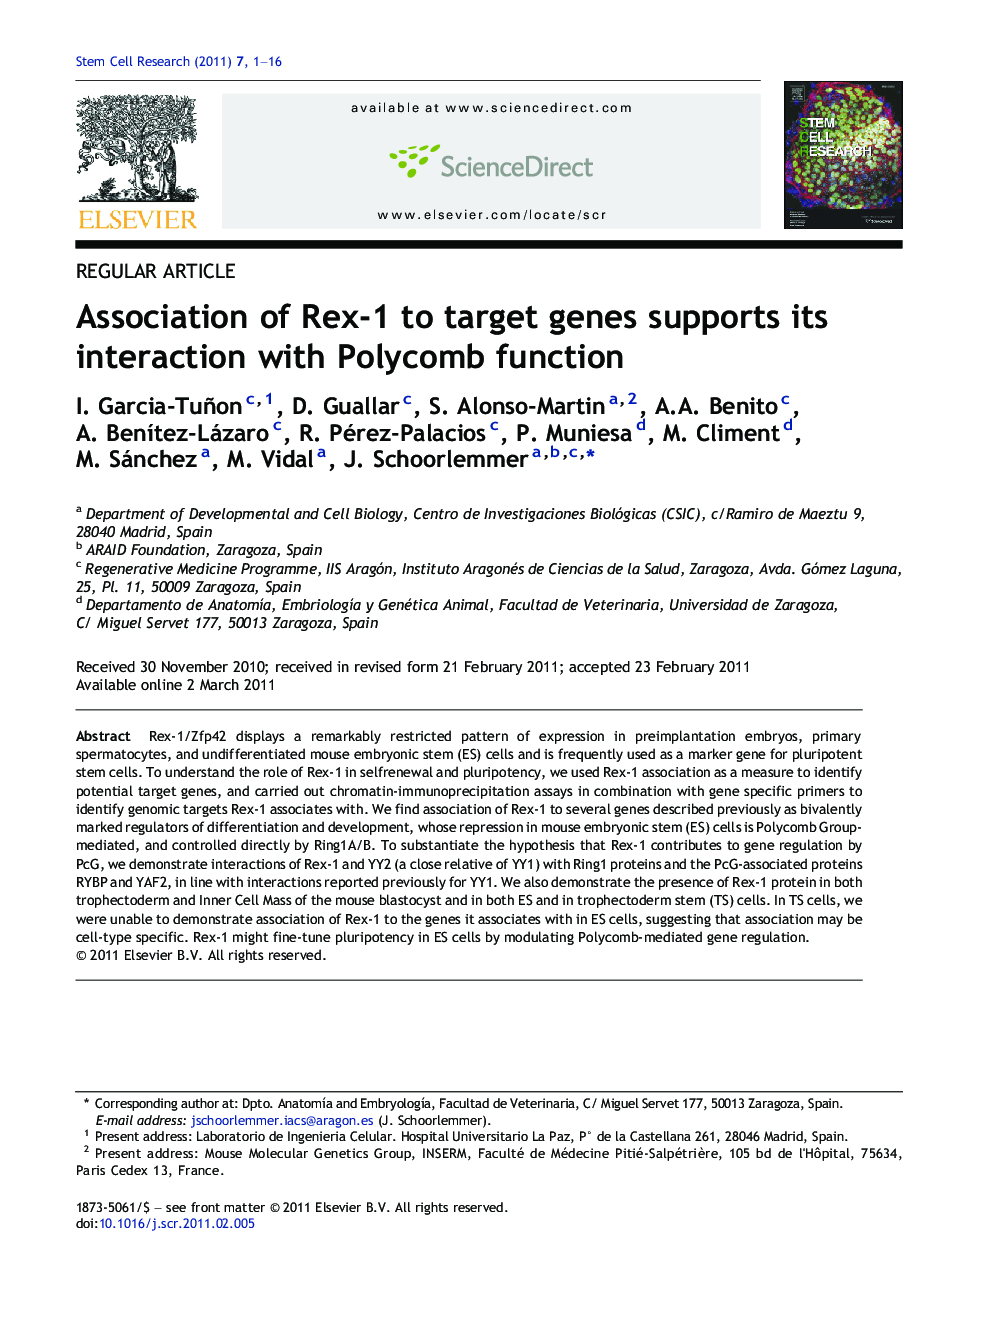 Association of Rex-1 to target genes supports its interaction with Polycomb function